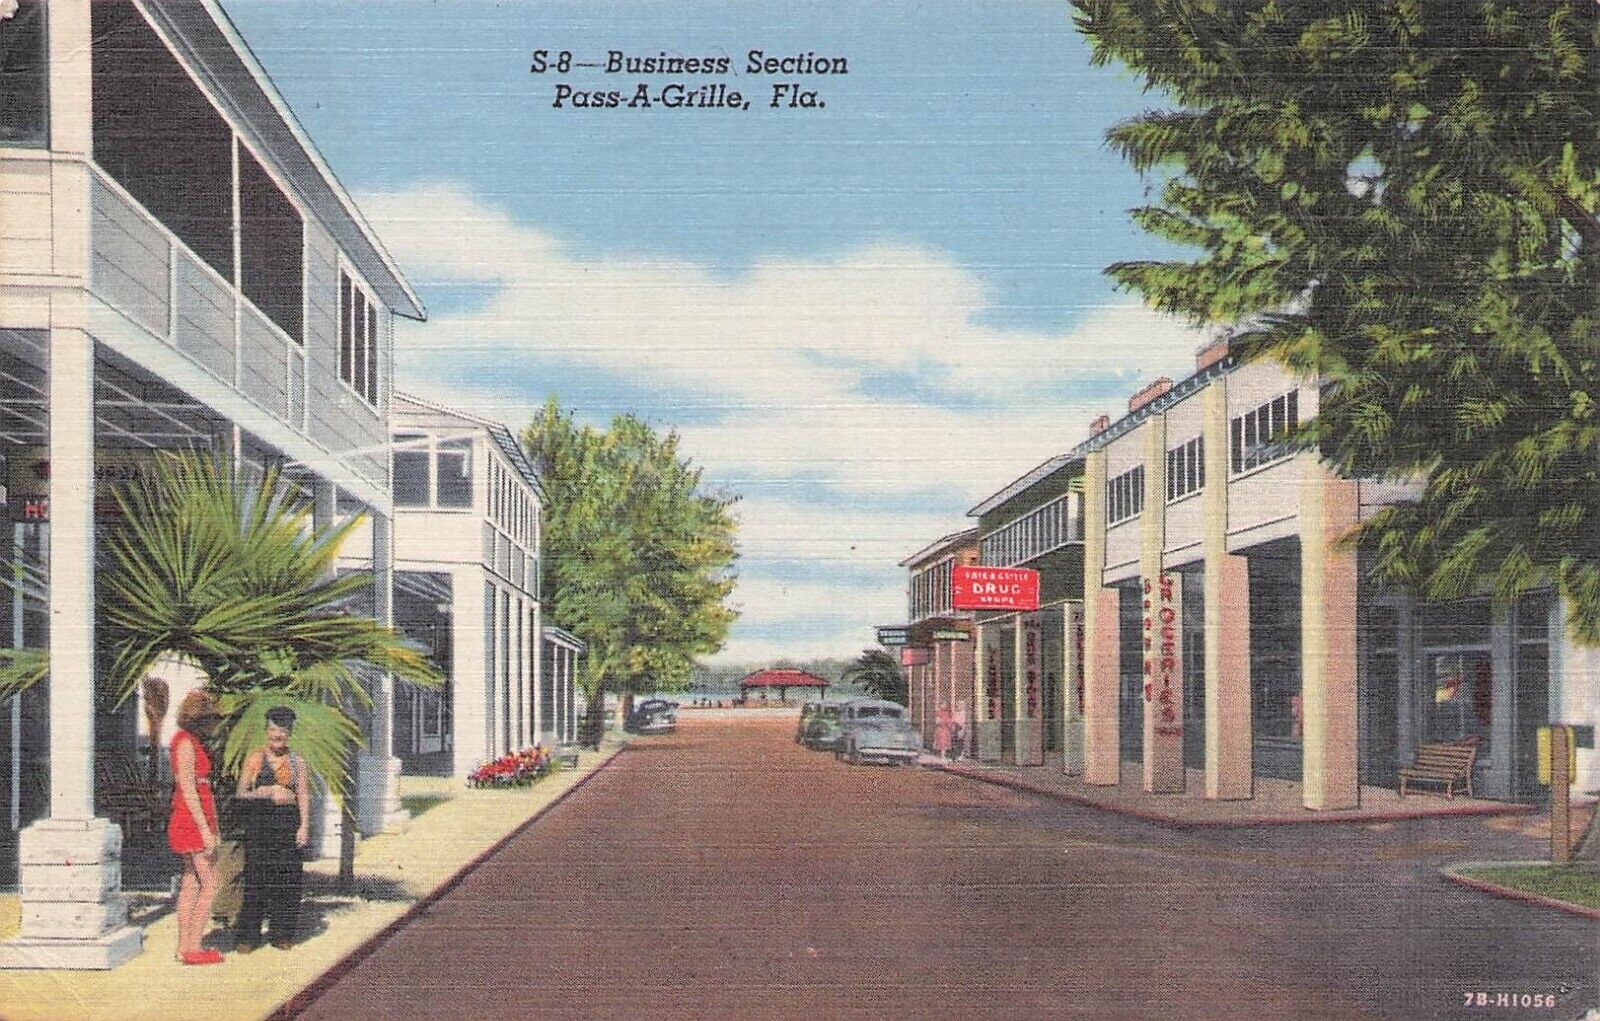 Business section Pass-A-Grille, Florida  PM 1956